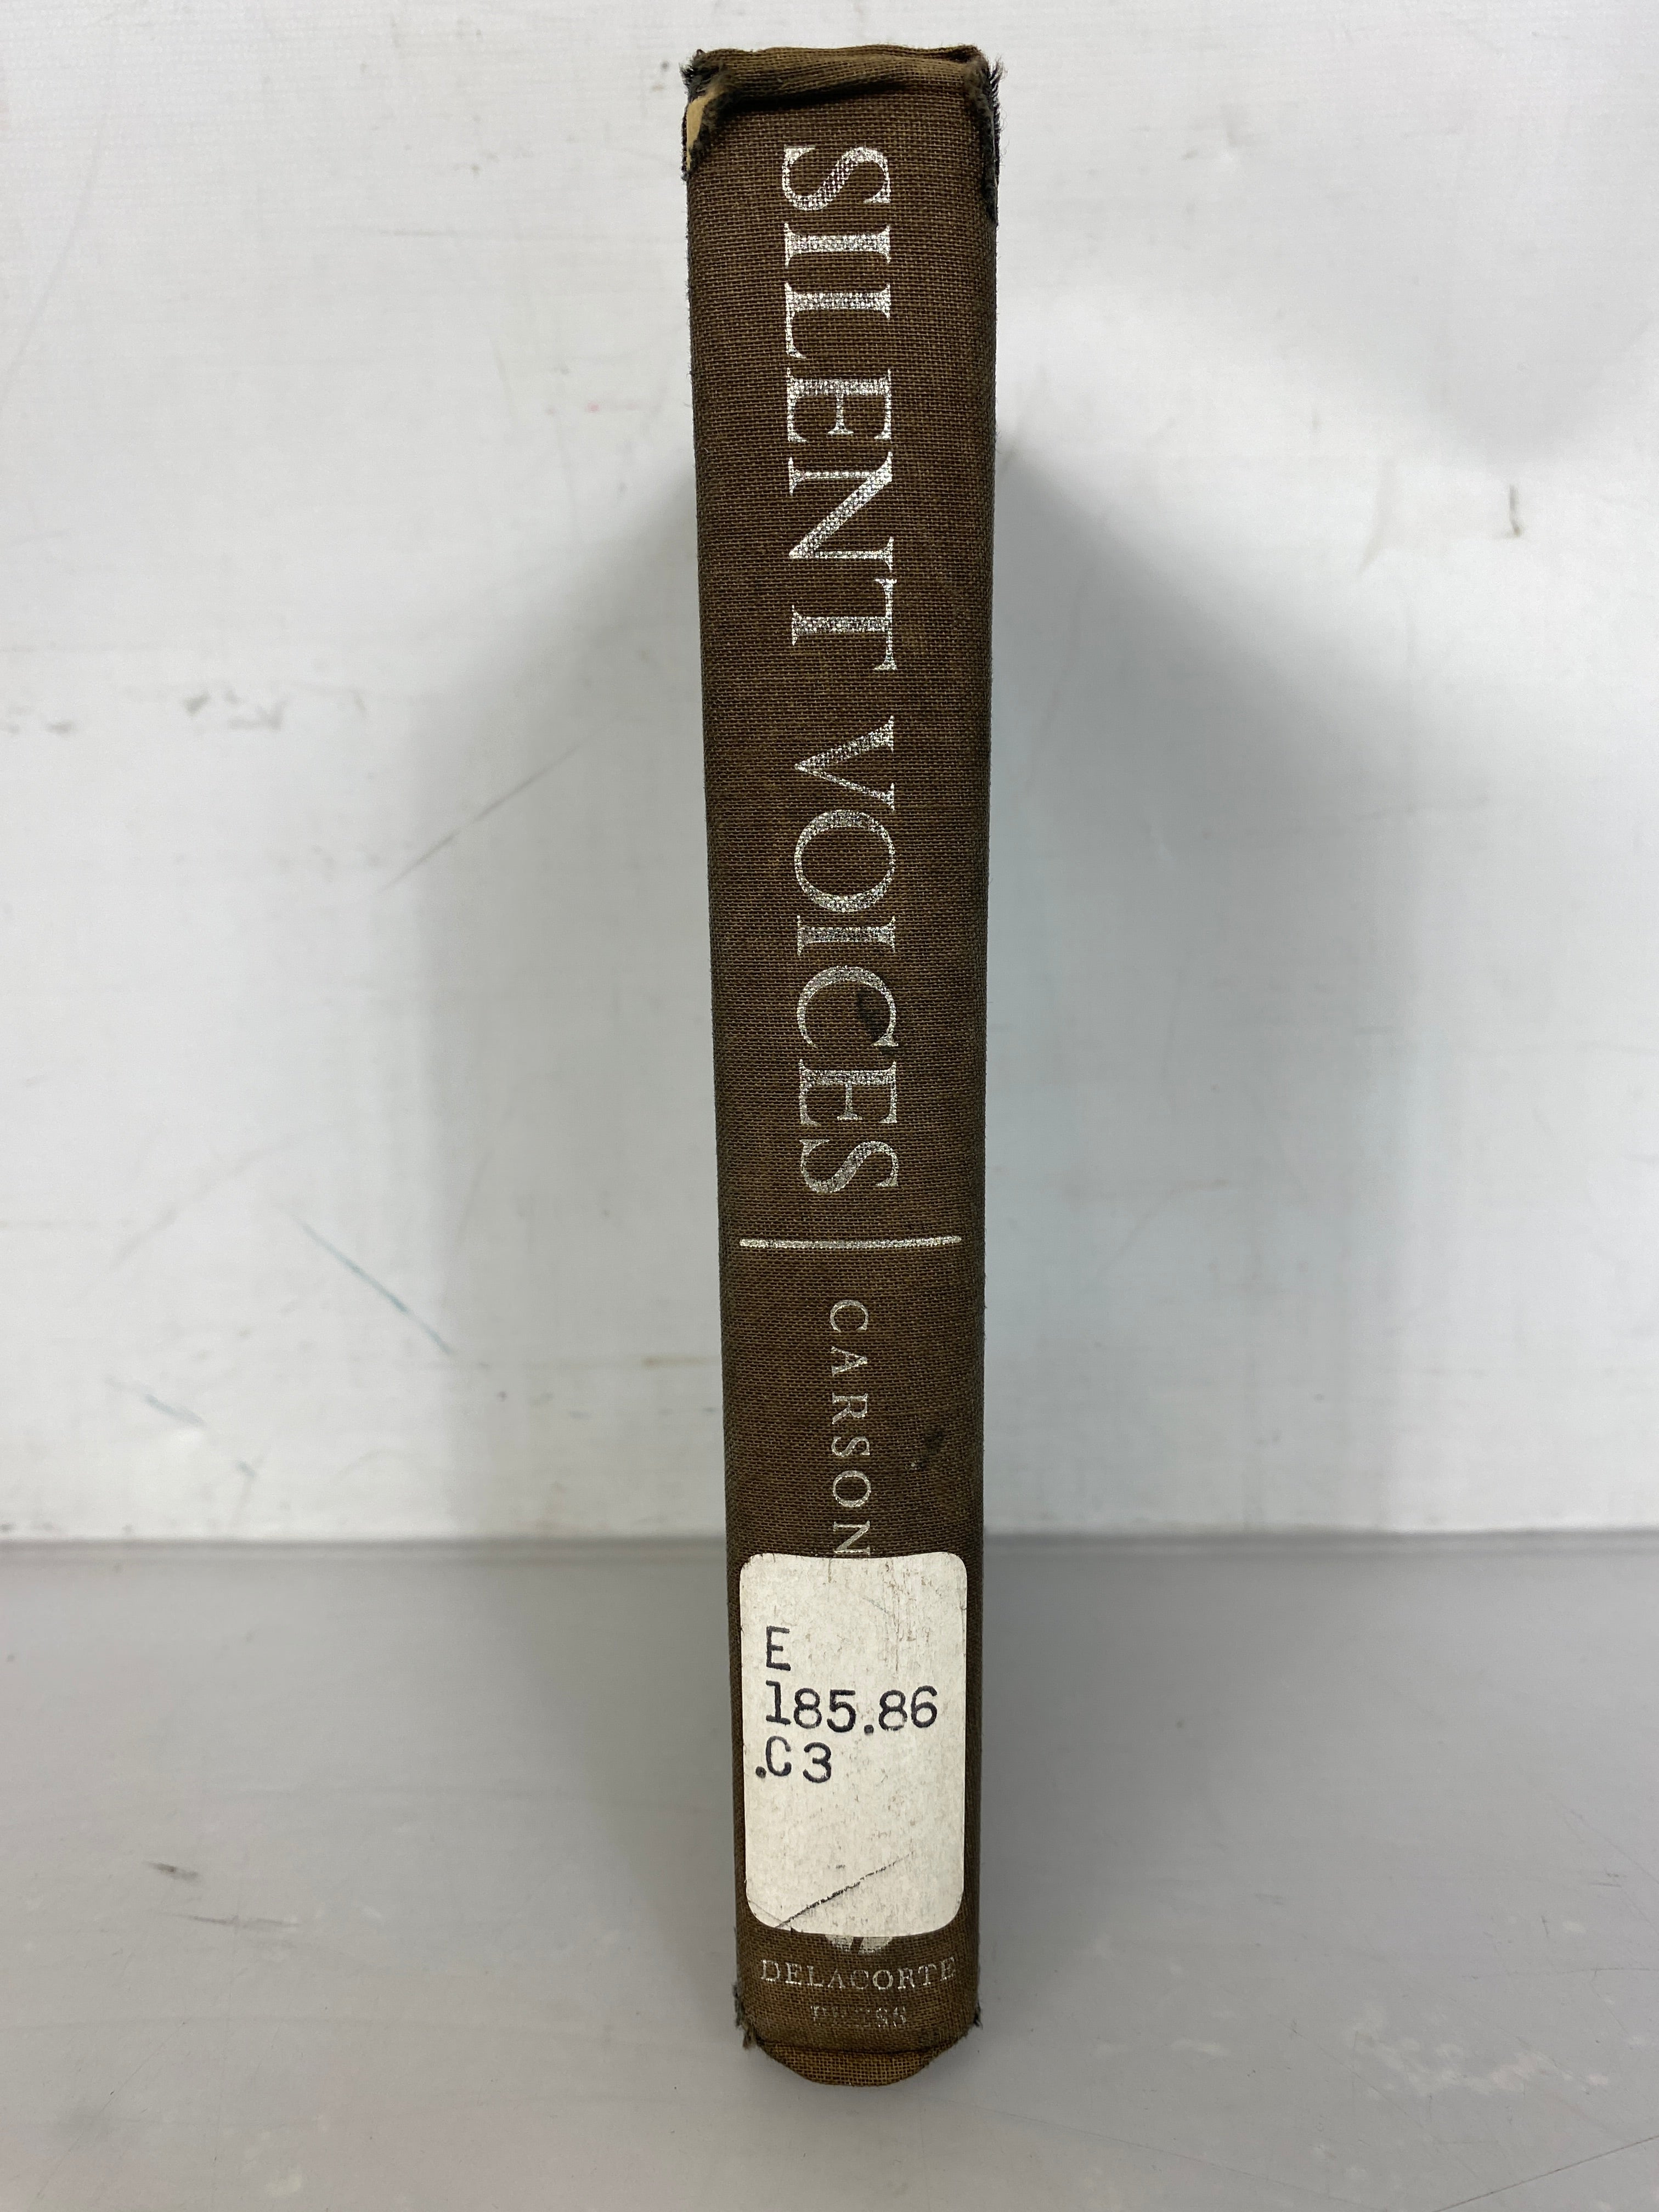 Lot of 3 Odyssey/White Ethics and Black Power/Silent Voices 1969-1971 HC